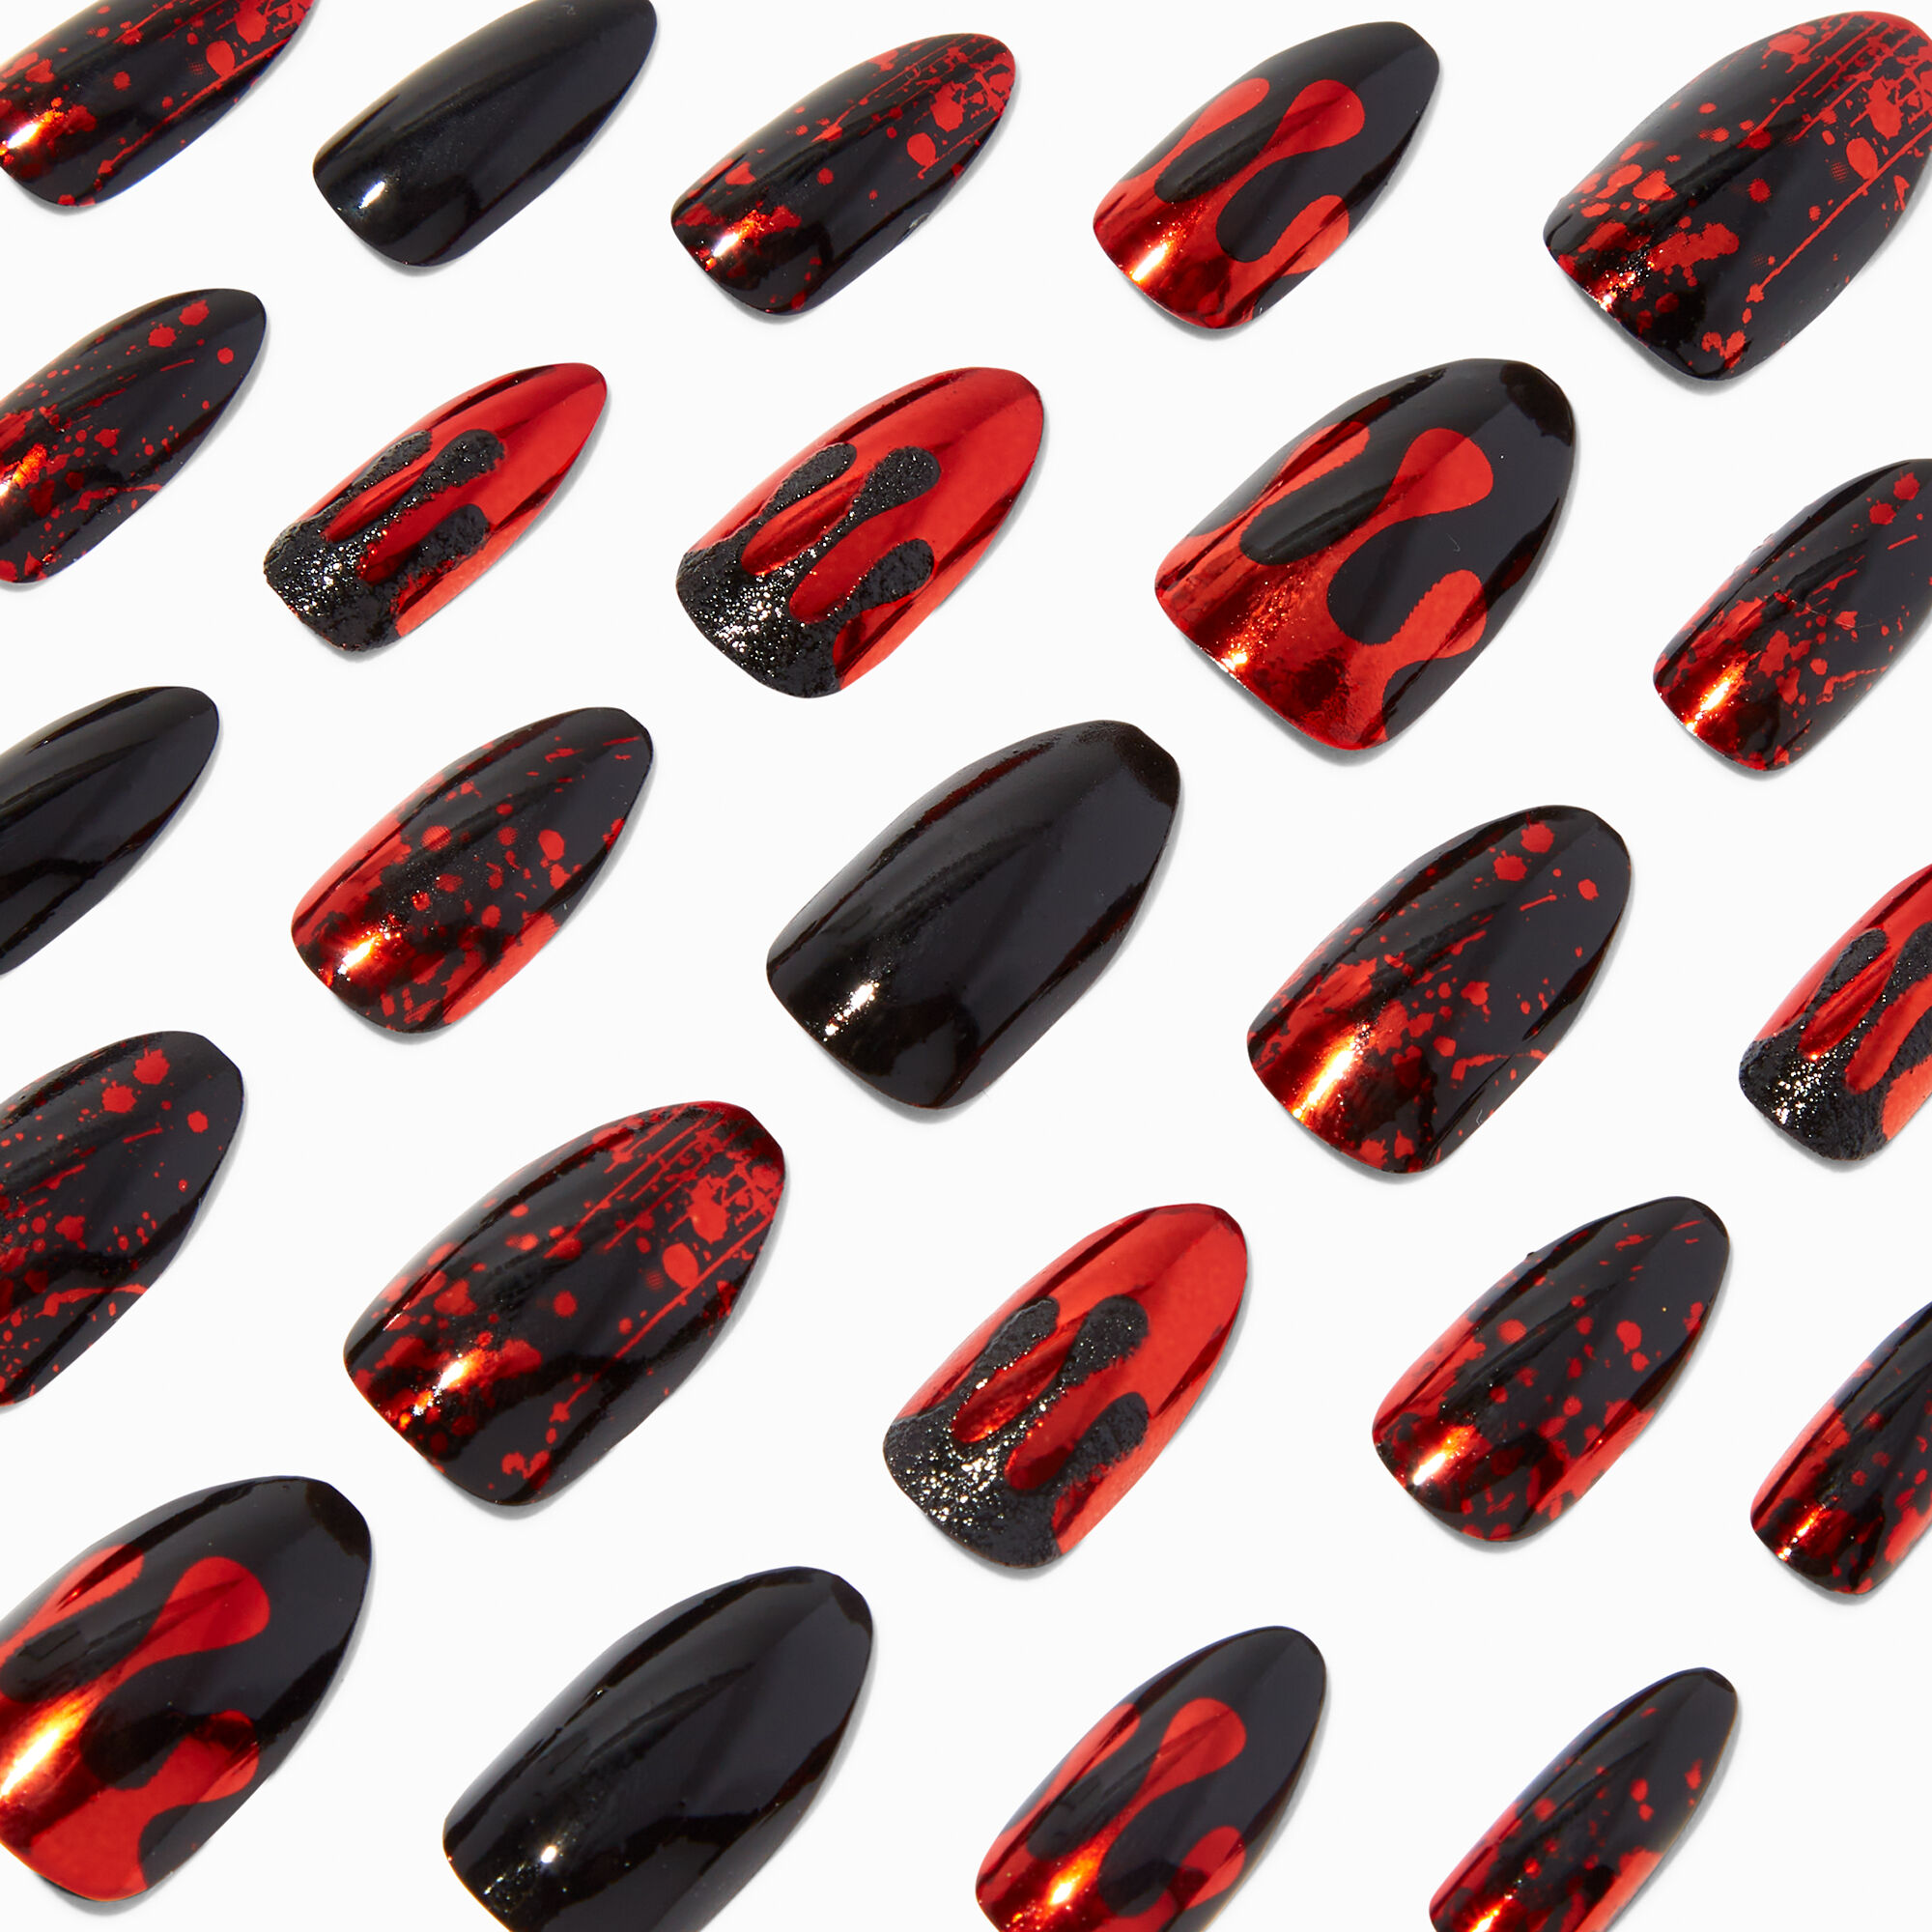 View Claires Black Dripping Blood Squareletto Press On Faux Nail Set 24 Pack Red information